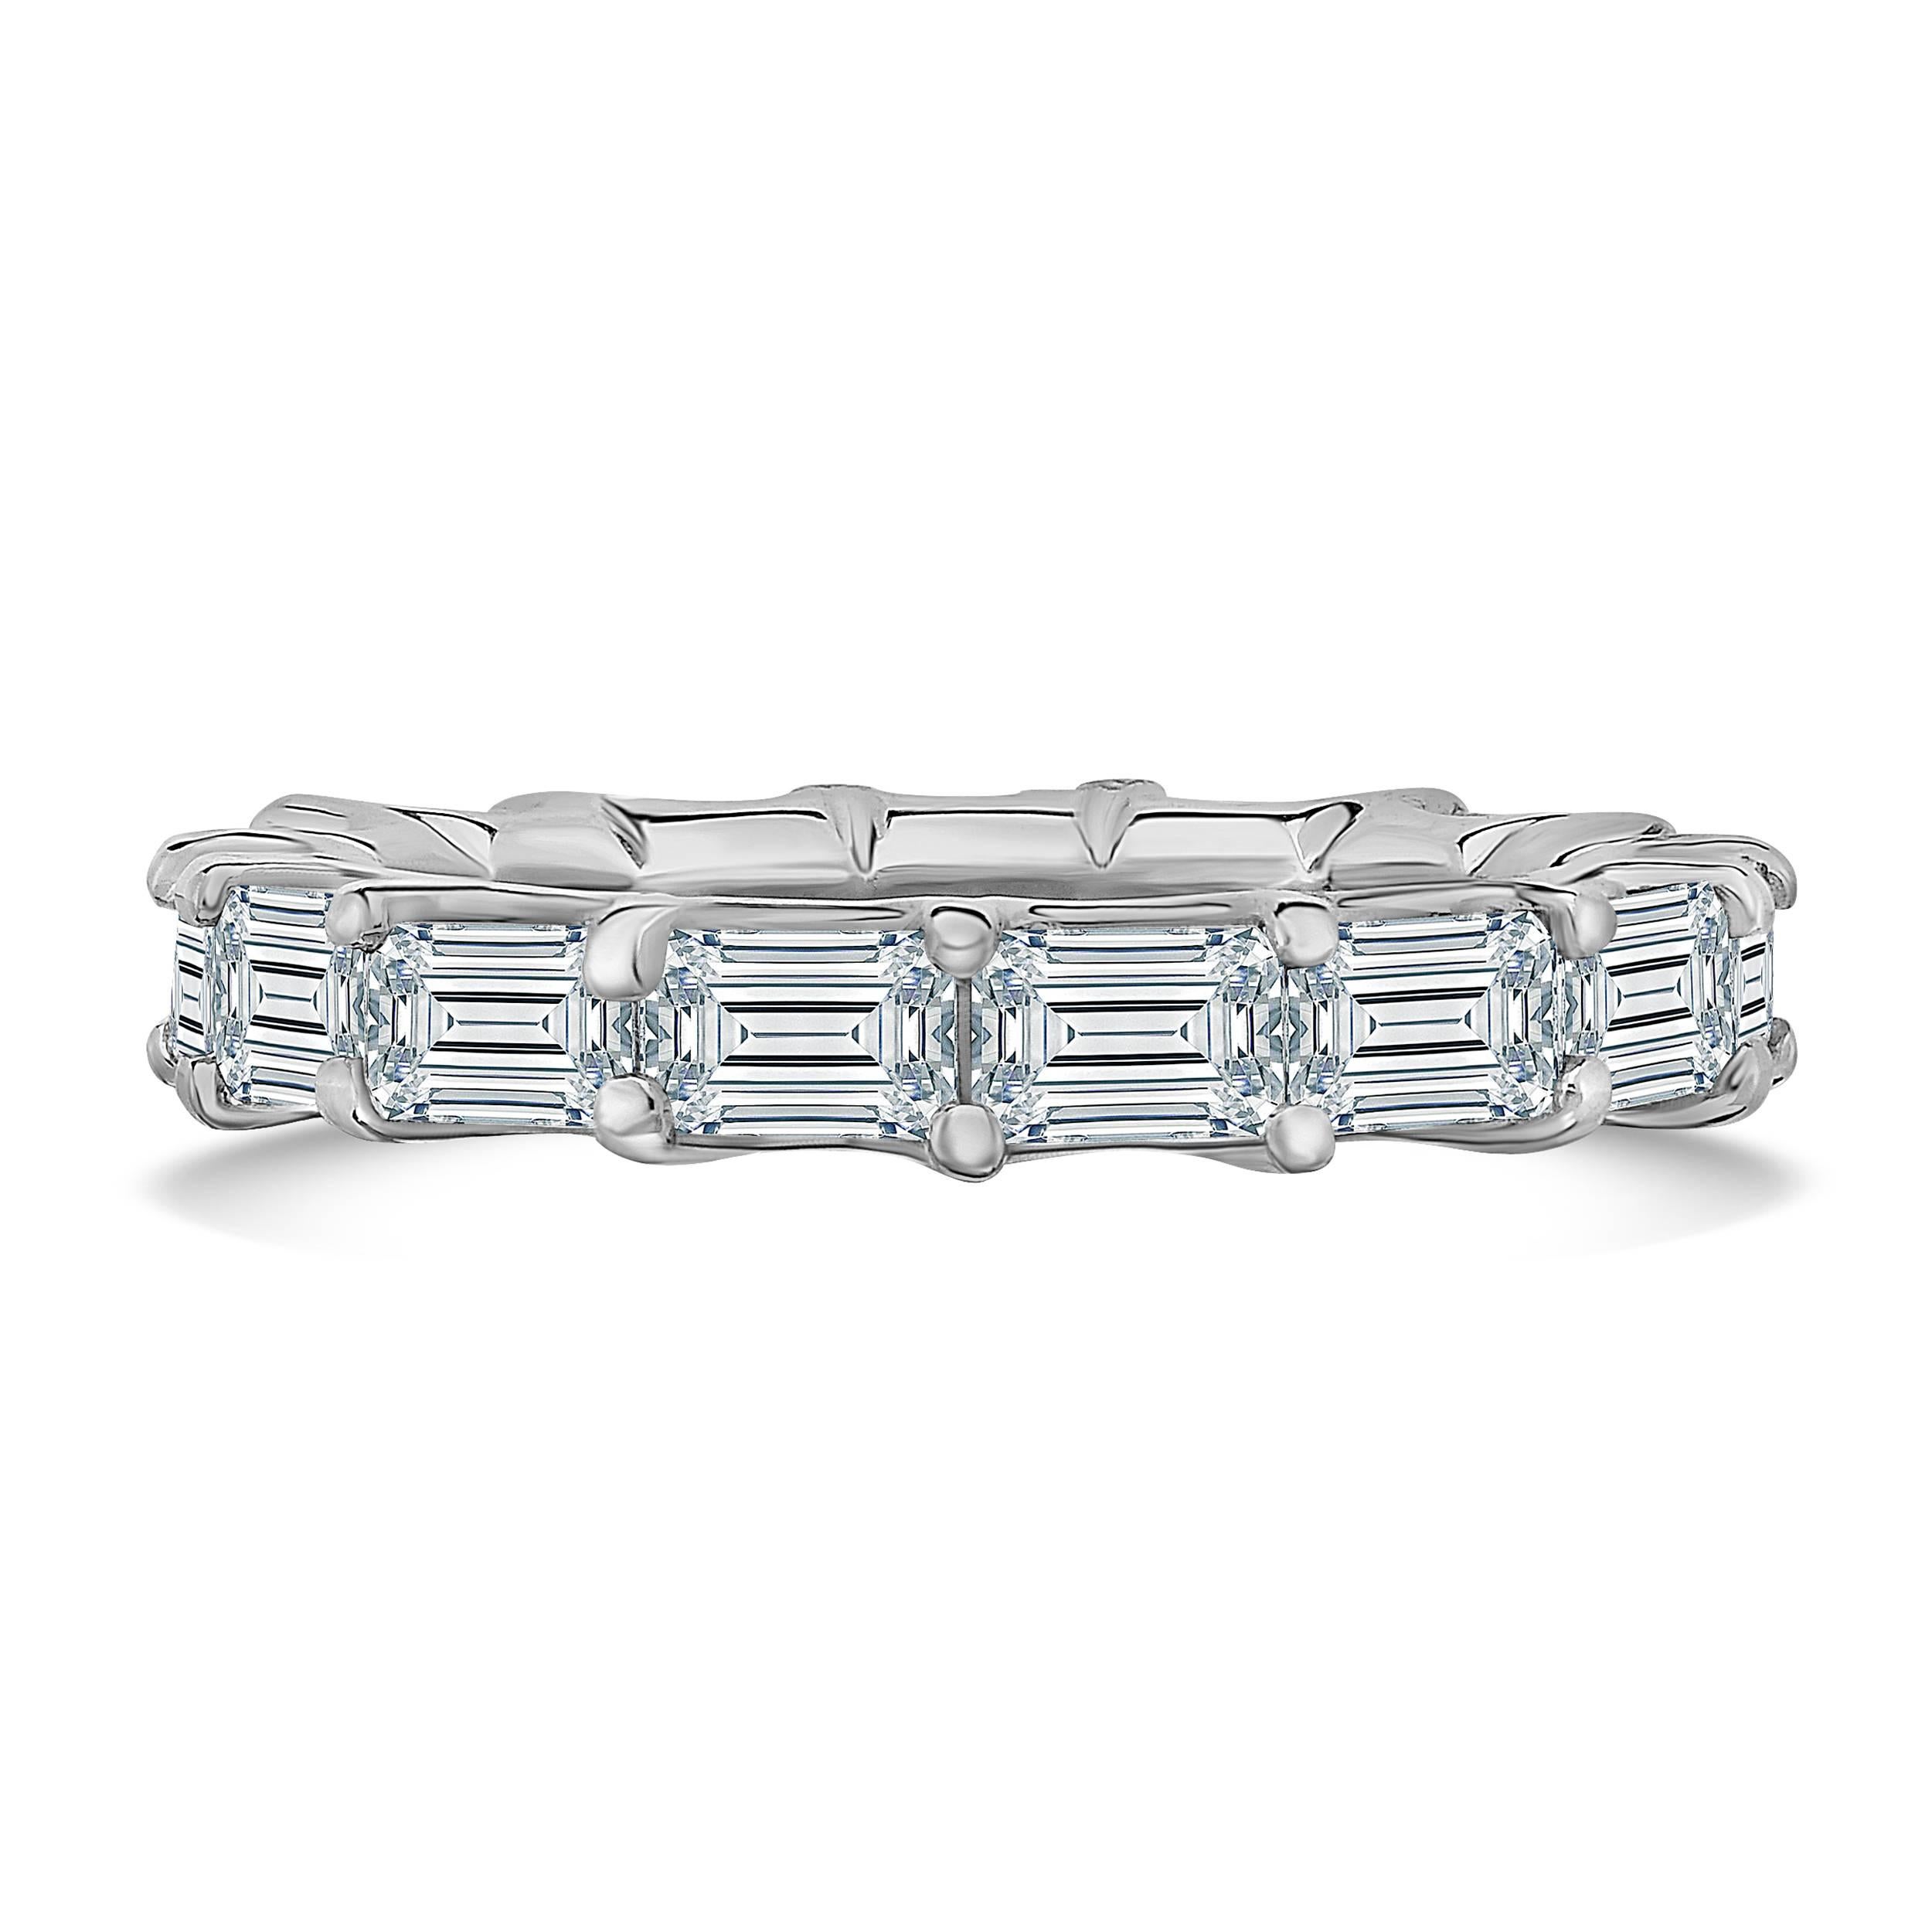 Stunning 3.30 carat emerald cut diamond eternity band made of 15 perfectly matched H color VS clarity emerald cut diamonds, each of which is securely set in a "U" setting that allows you to see the sides and bottom of the diamond making